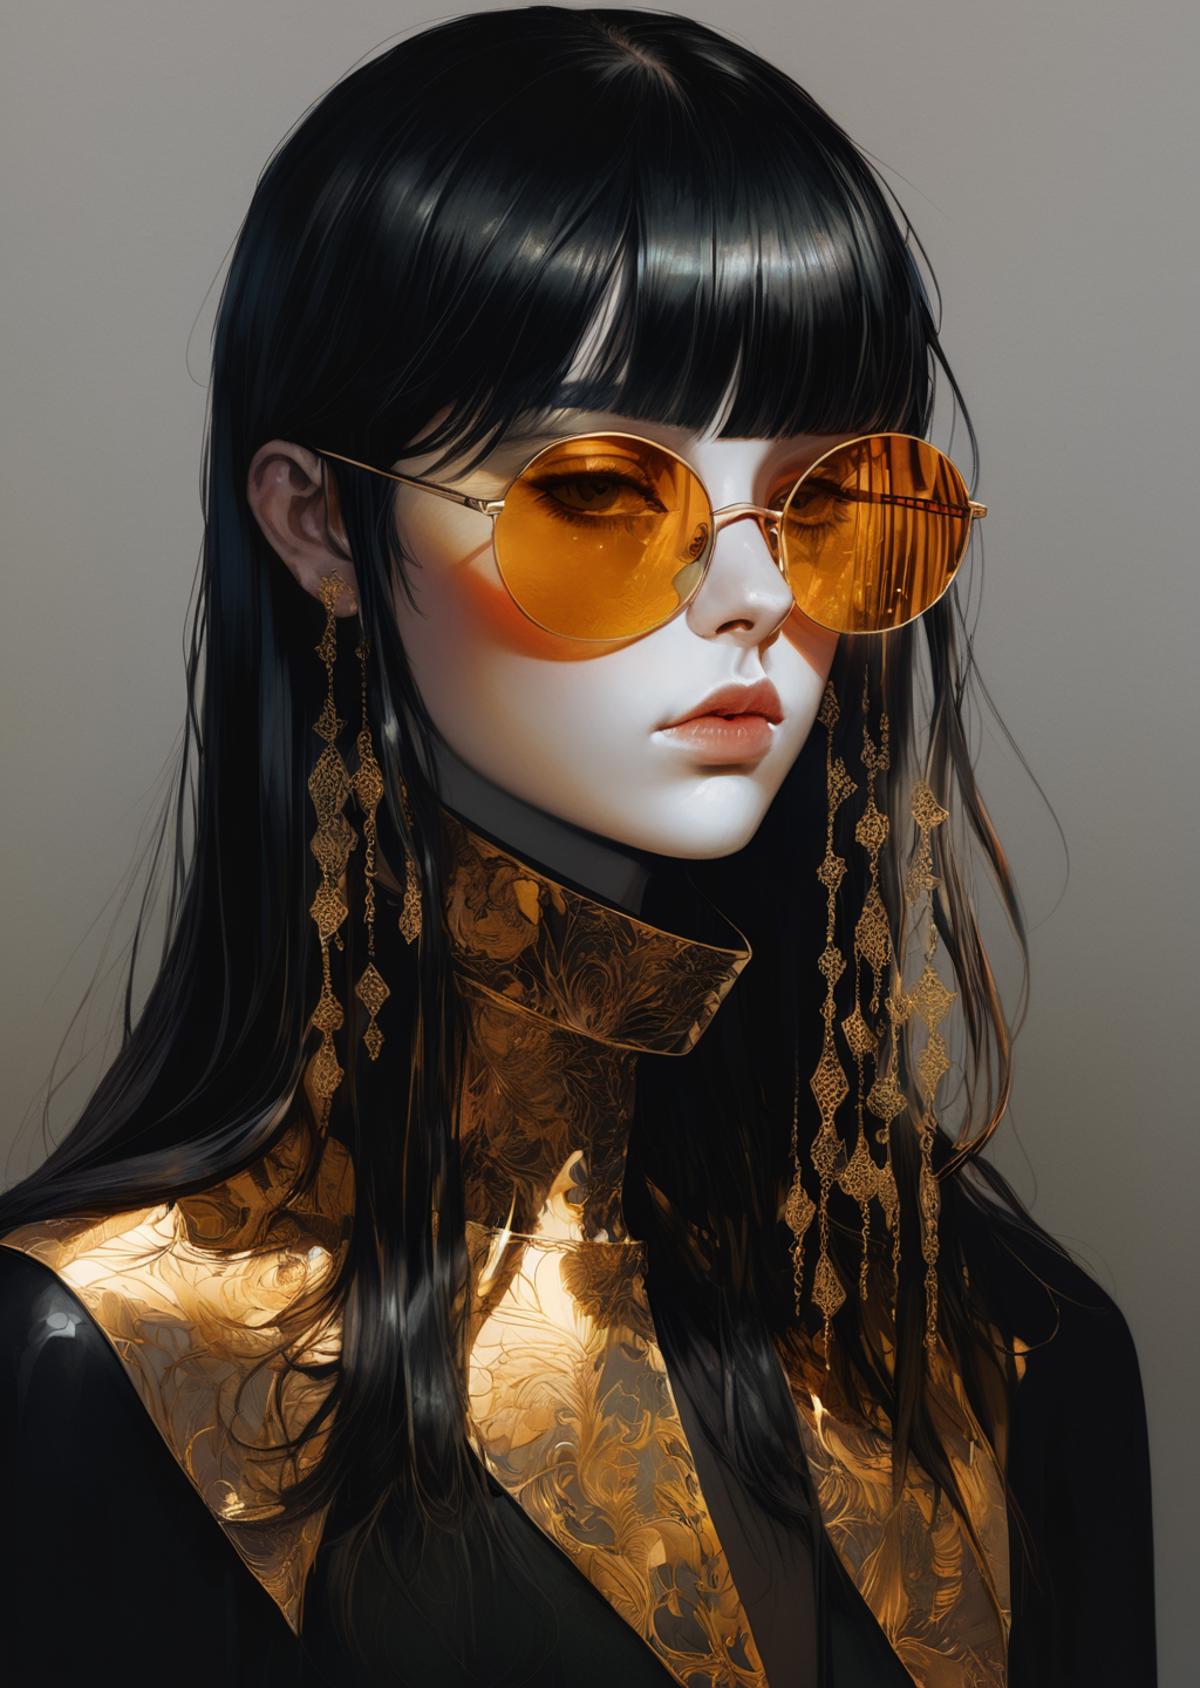 A woman with black hair and yellow sunglasses, wearing gold jewelry and a gold shirt.